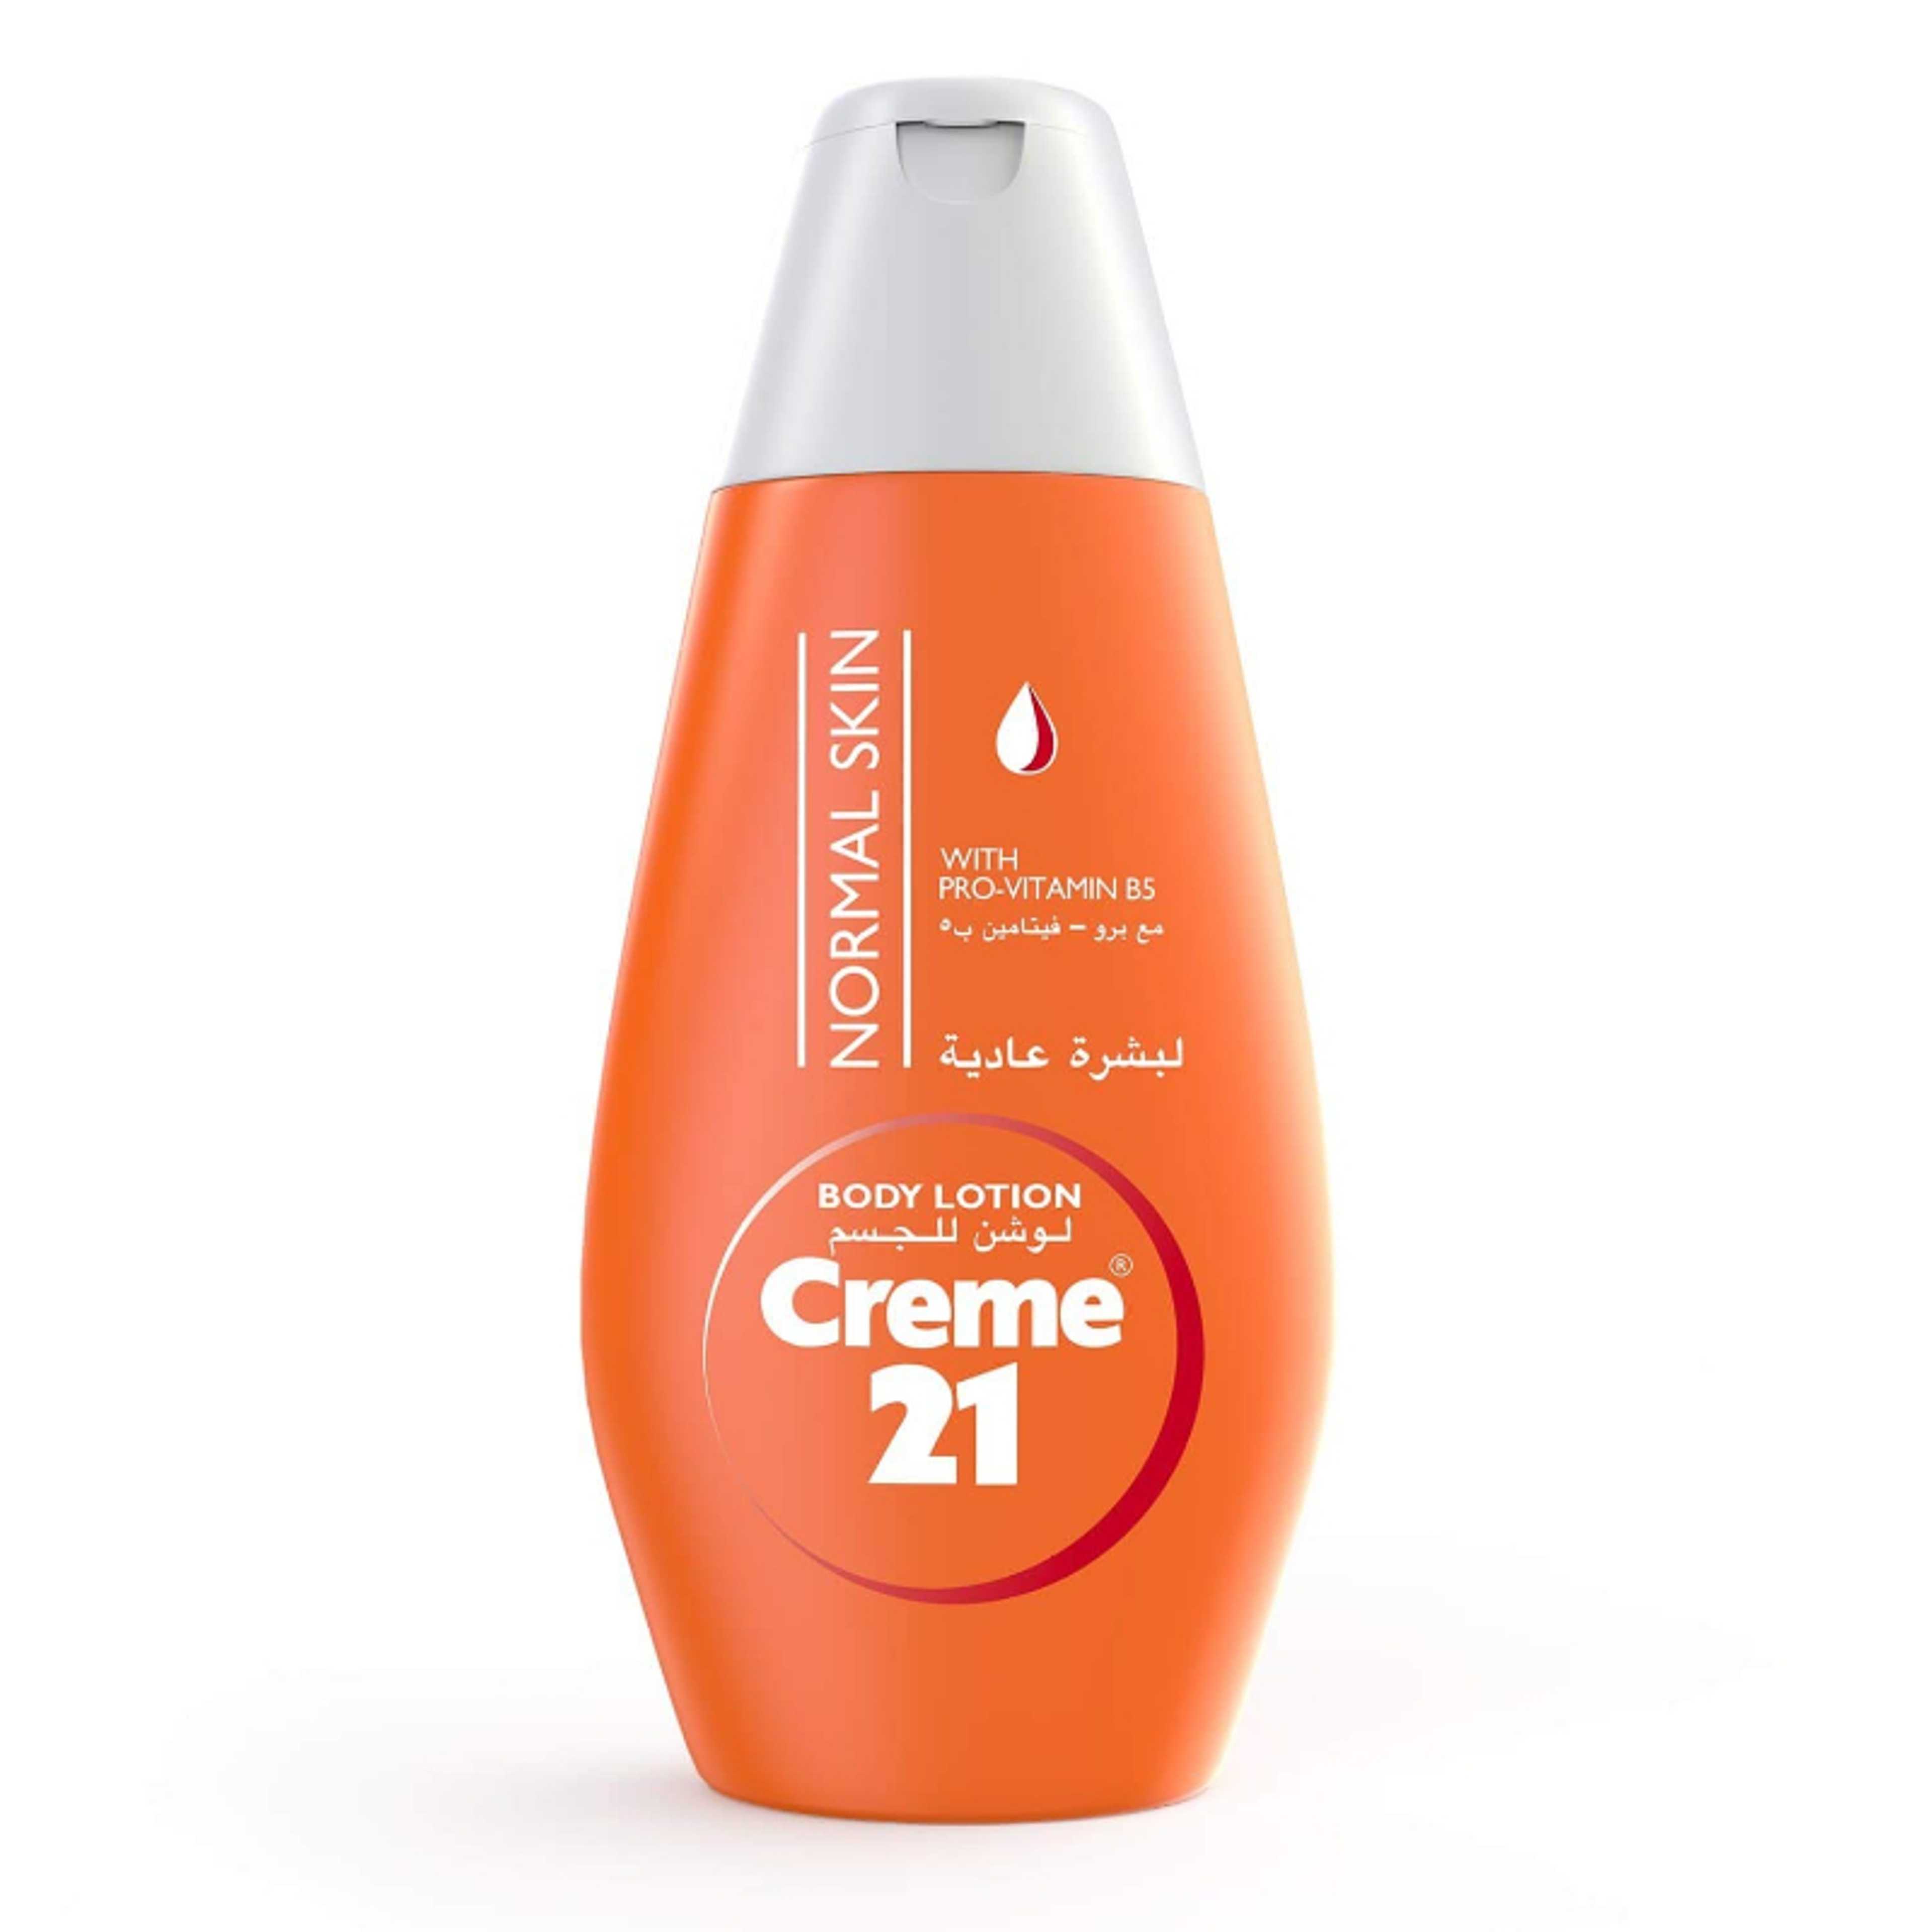 CREME 21 BODY LOTION NORMAL SKIN WITH PRO-VITAMIN B5 250ML (Imported)